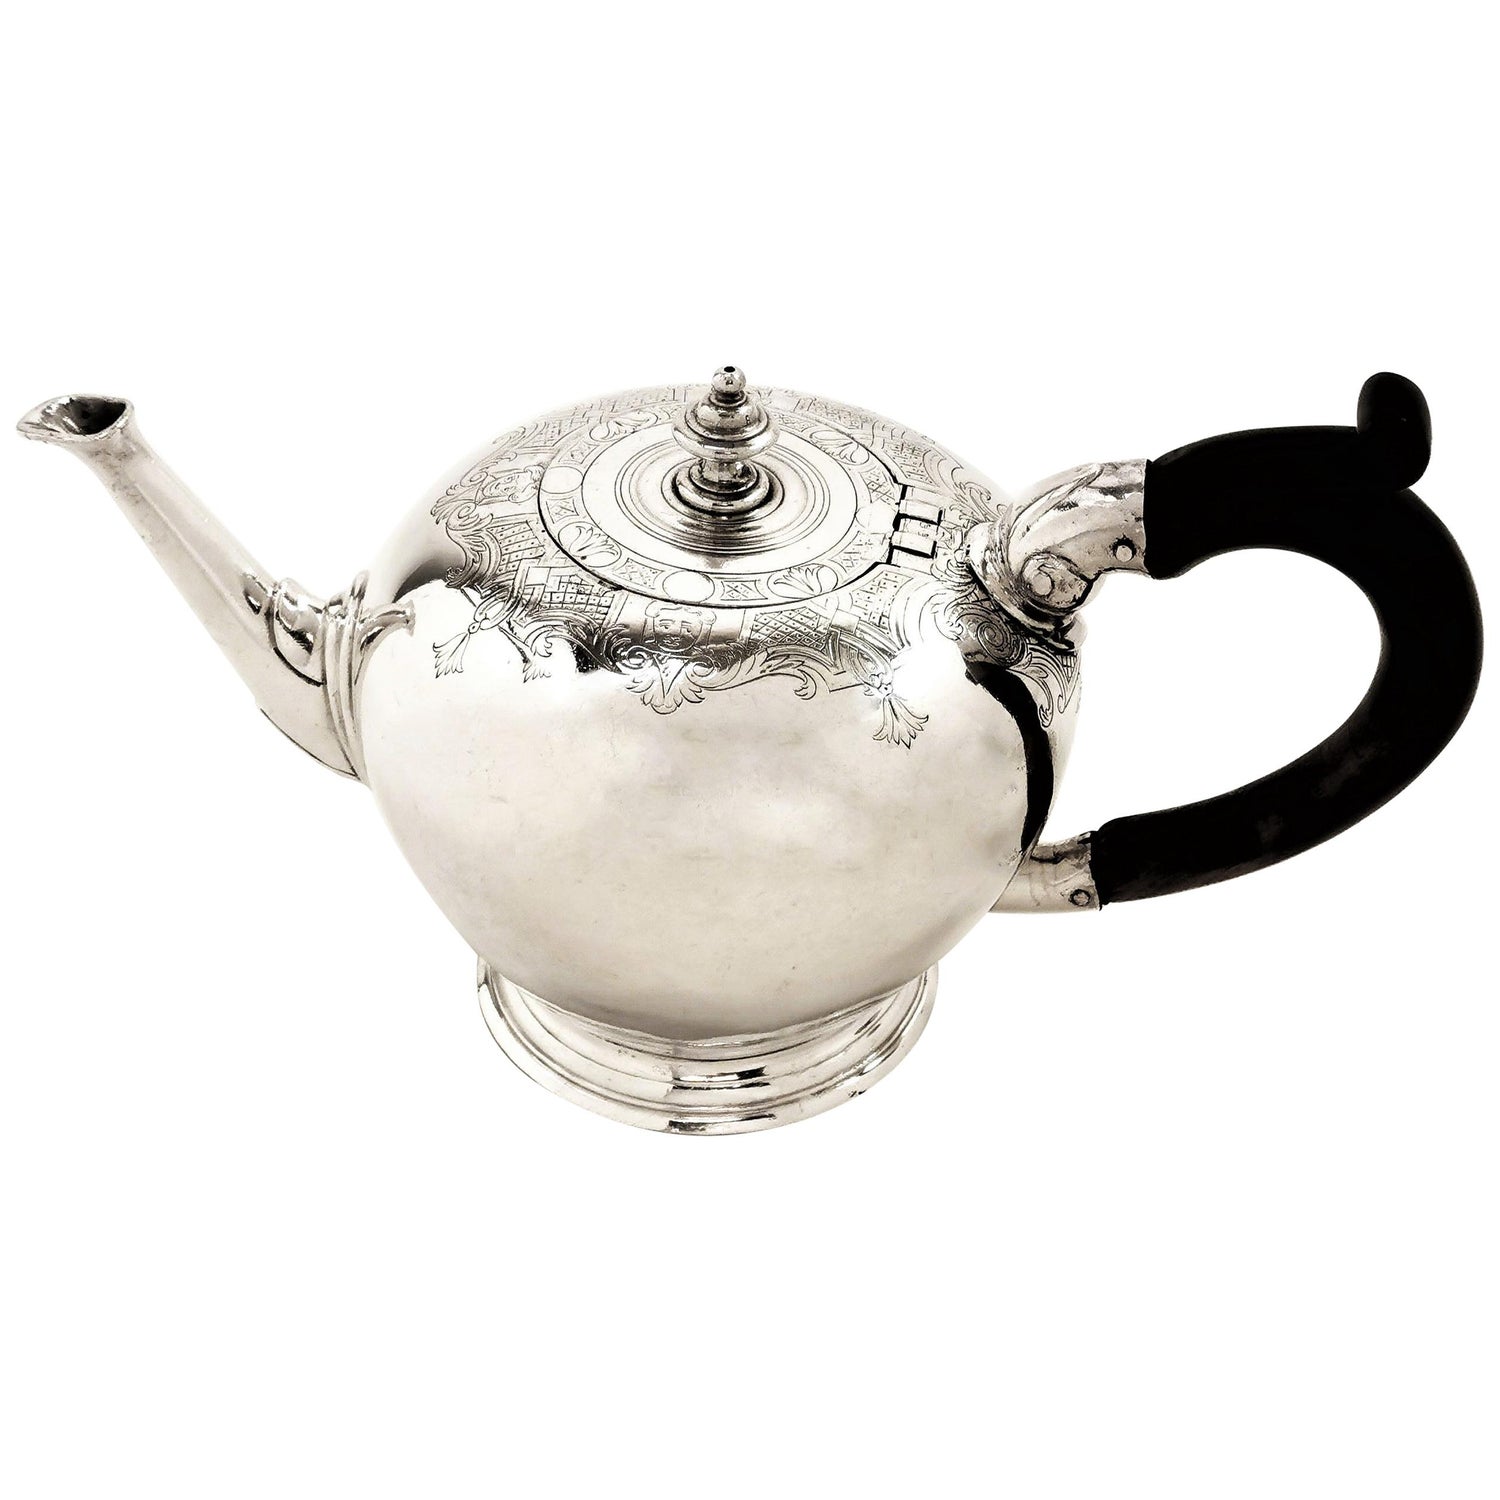 Antique George I Bachelor Solid Silver Teapot 1723 Early Georgian, 18th Century